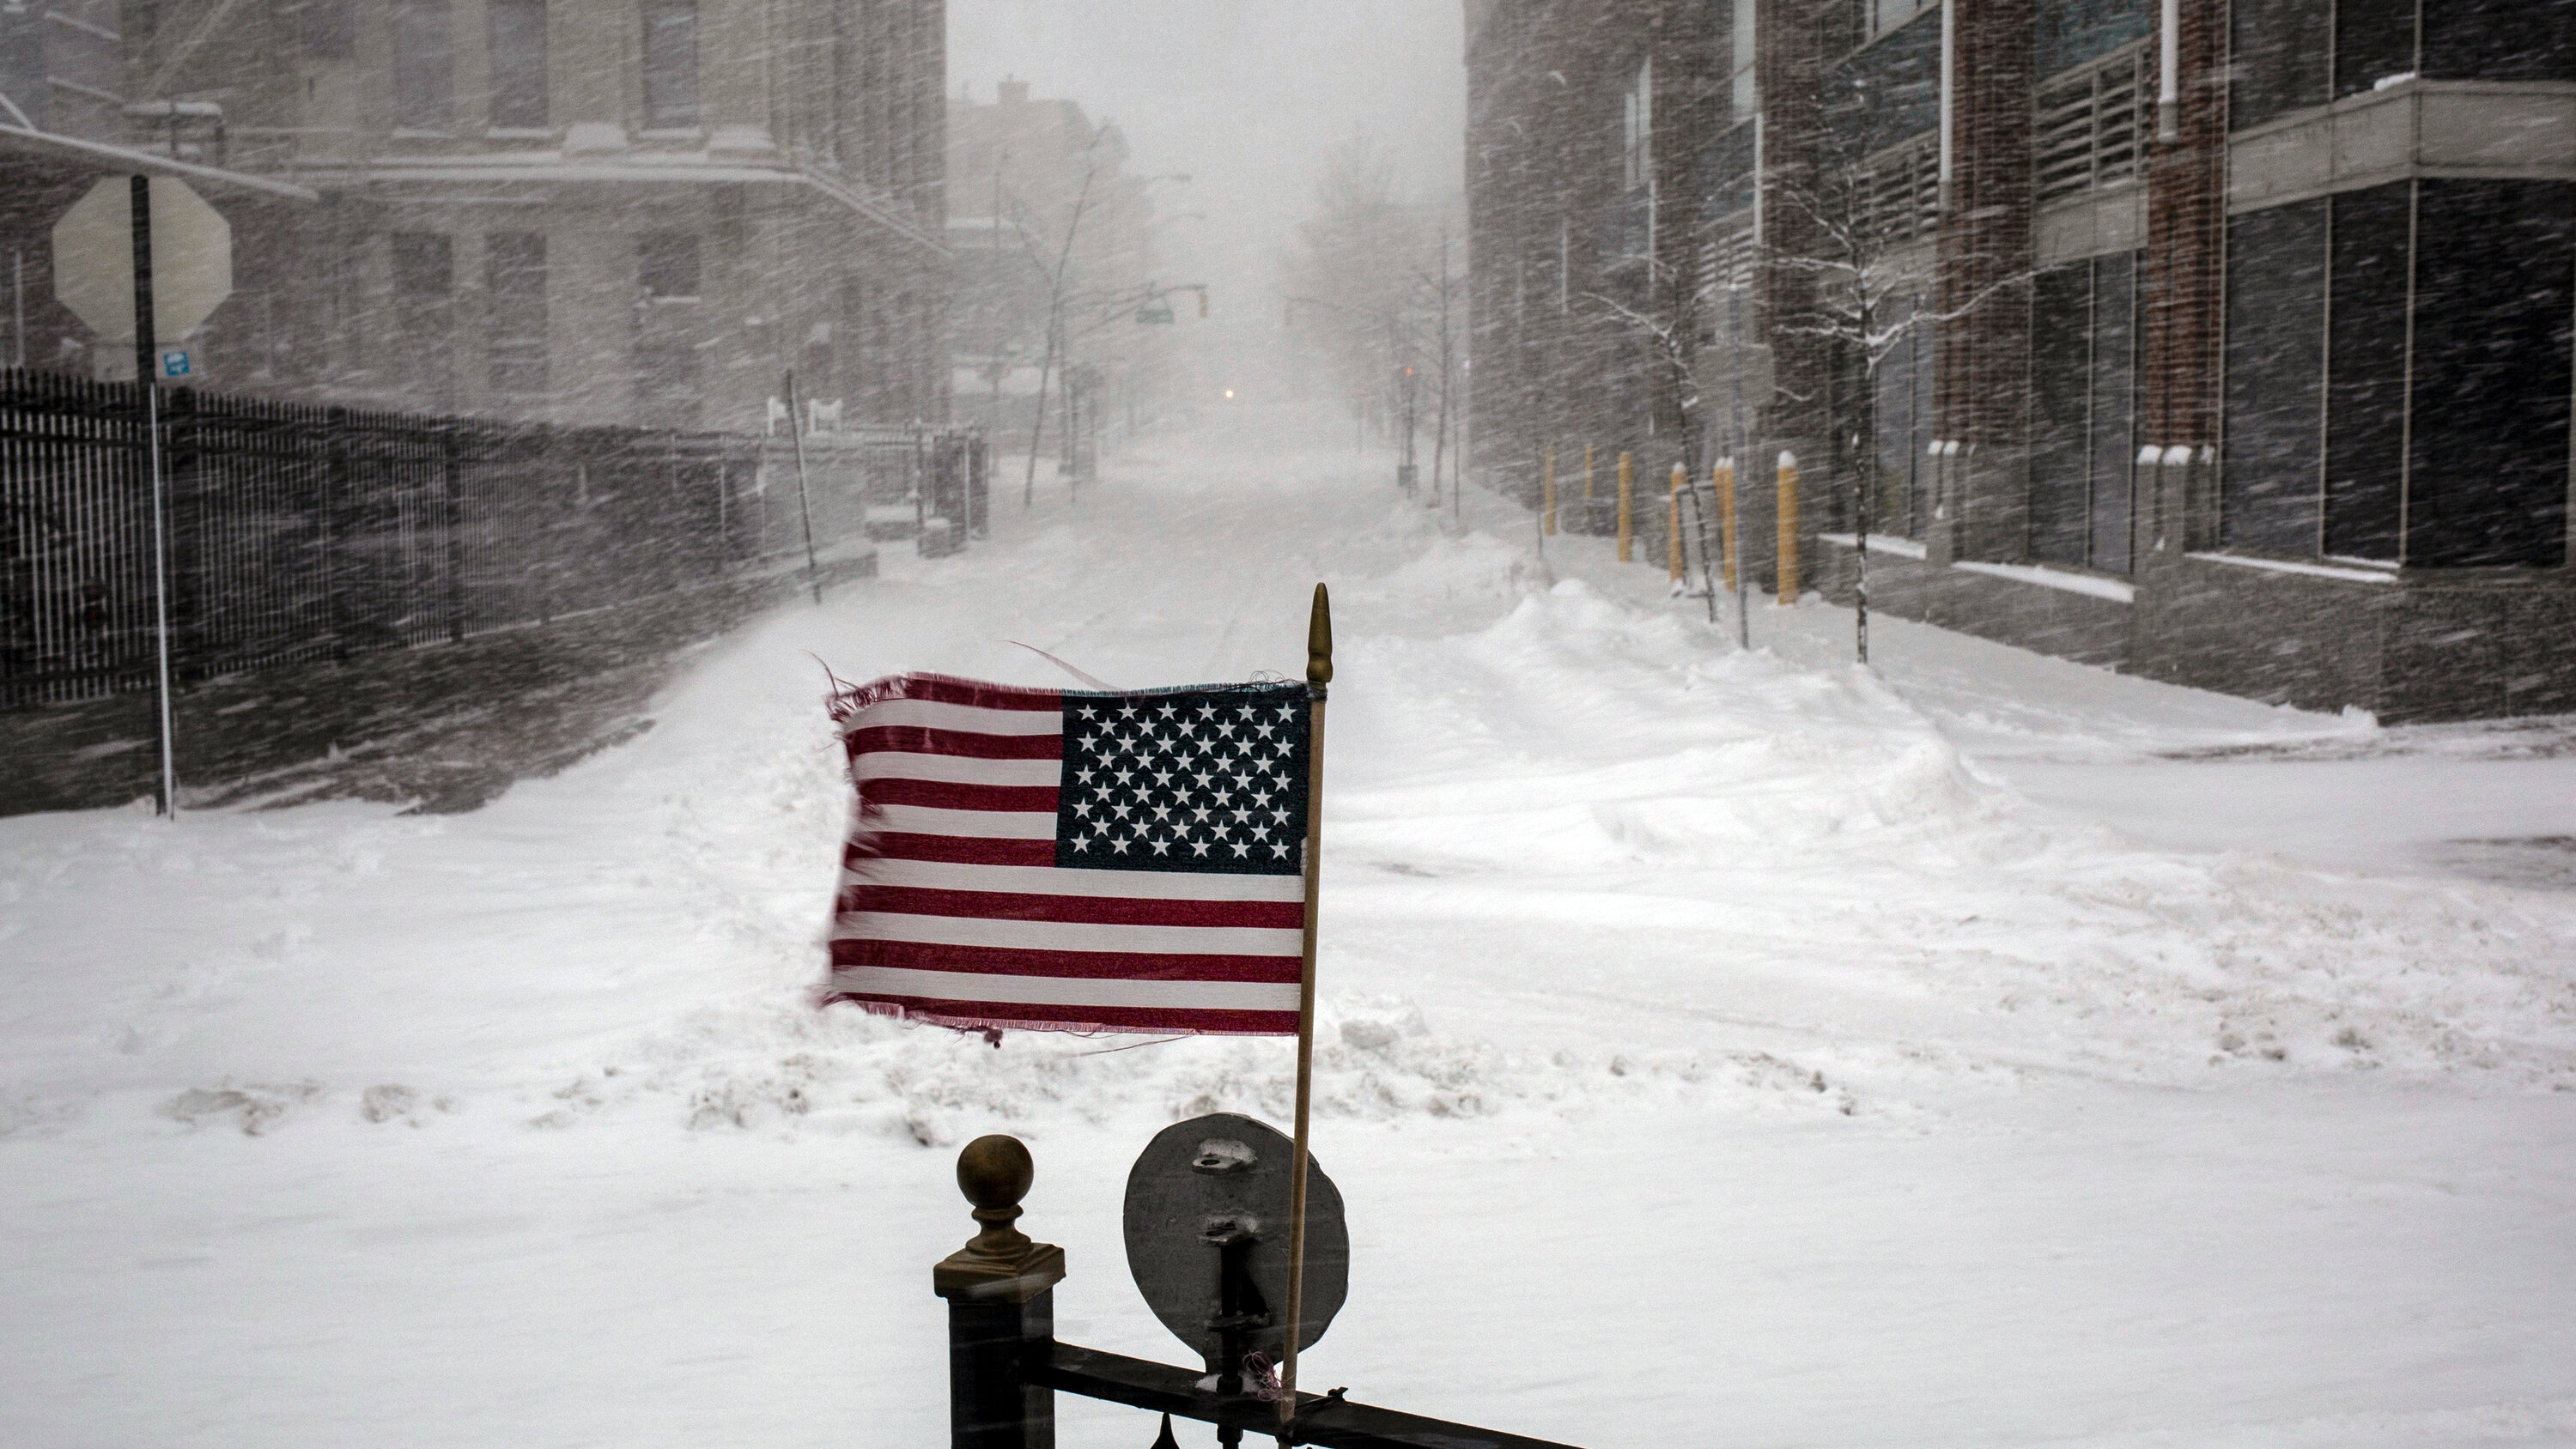 3000x1688 Heavy Snowfall in Northeast Disrupts Travel and Vaccine Rollout The New York Times